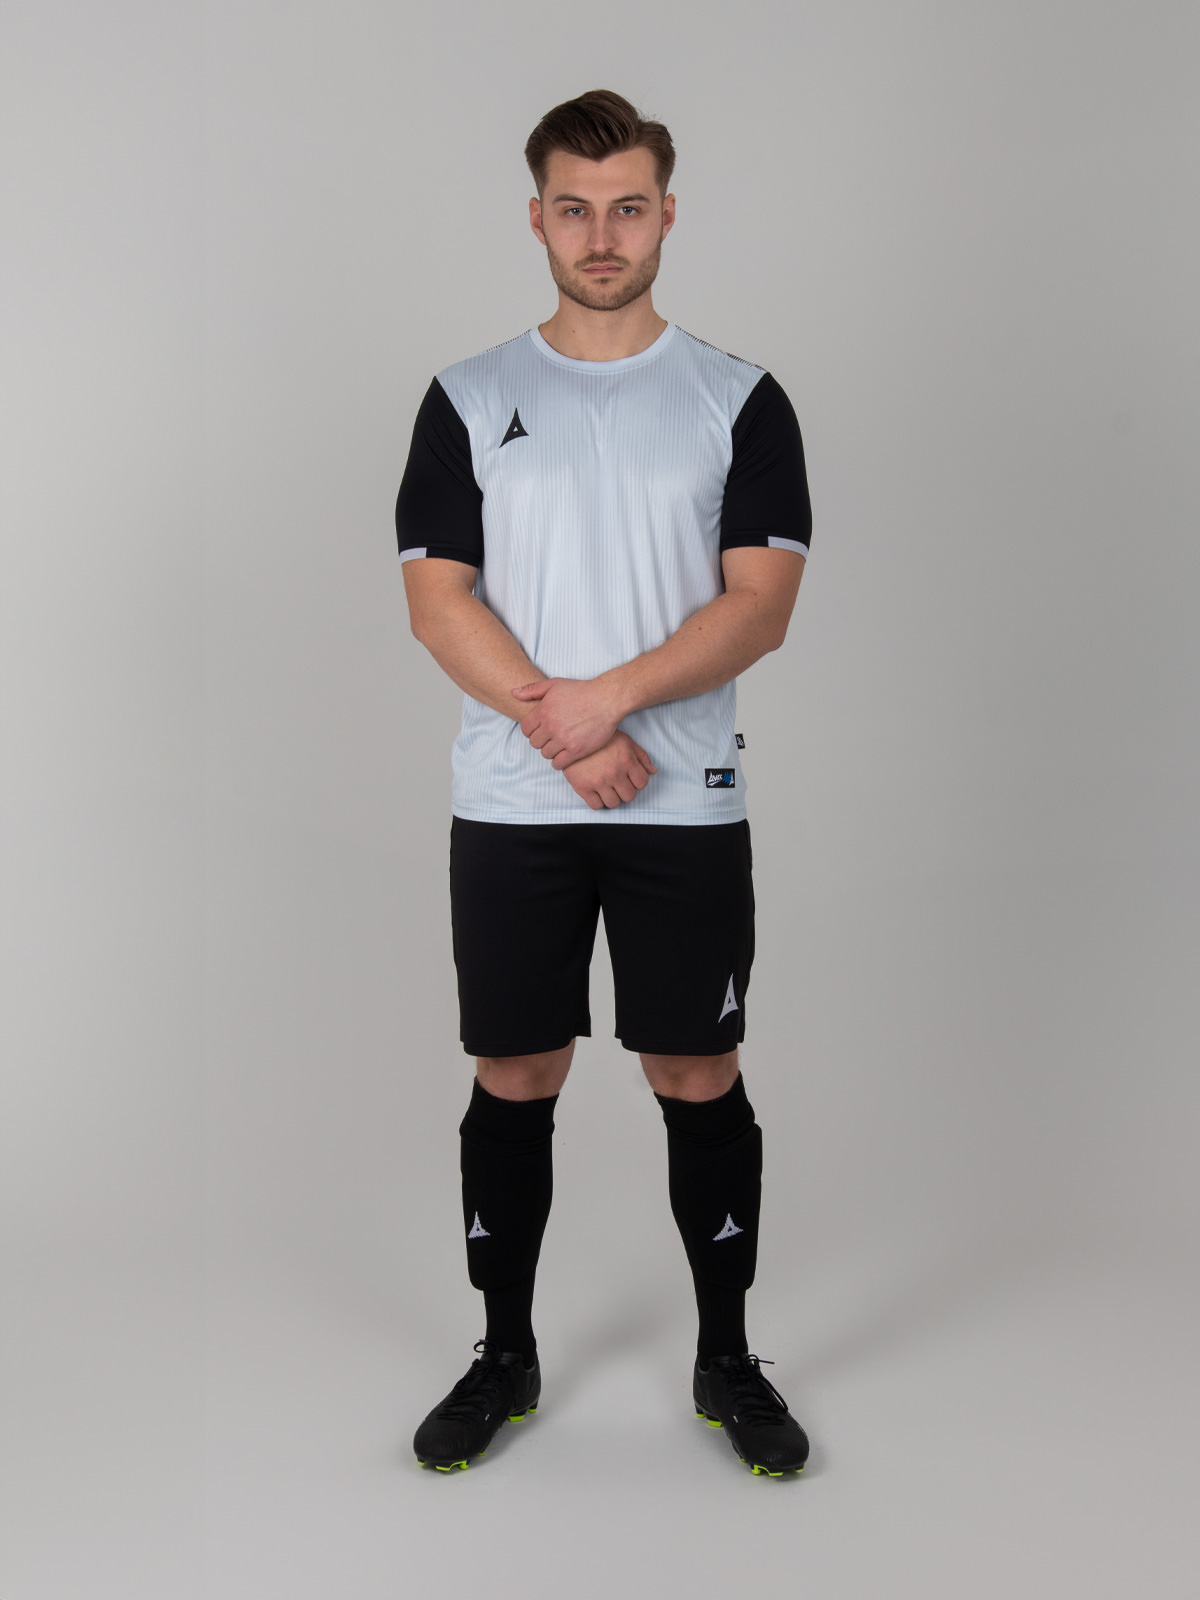 a grey football shirt is worn with black shorts and socks to match the sleeves of the top.